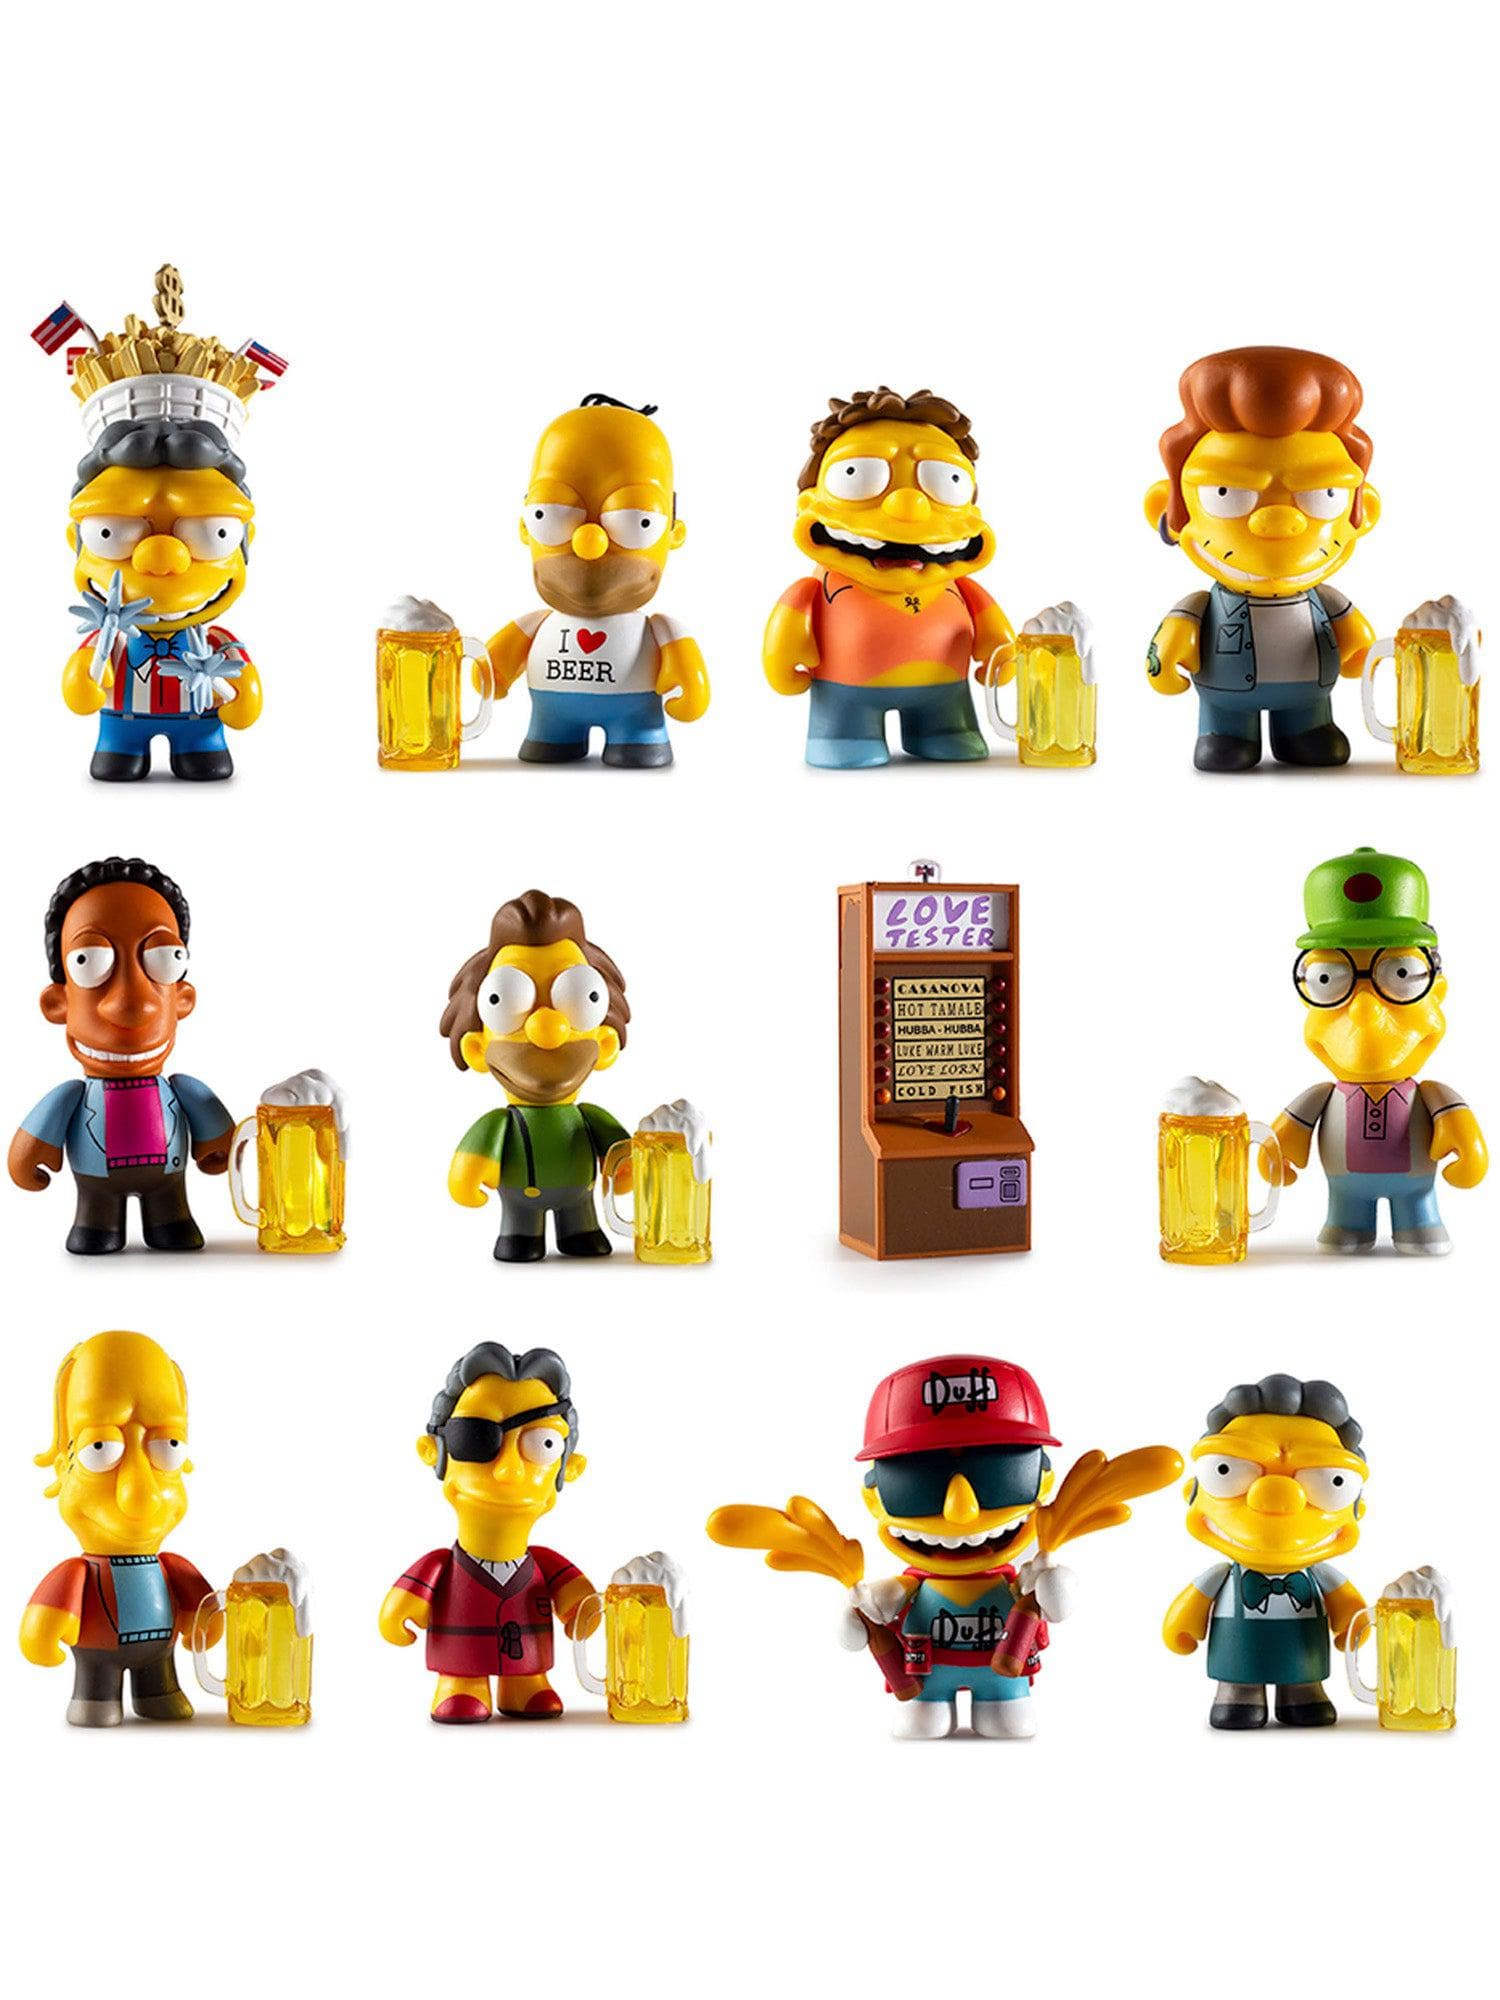 Kidrobot - The Simpsons Moes Tavern 3" Collectible Figures - Single Blind Box - costumes.com